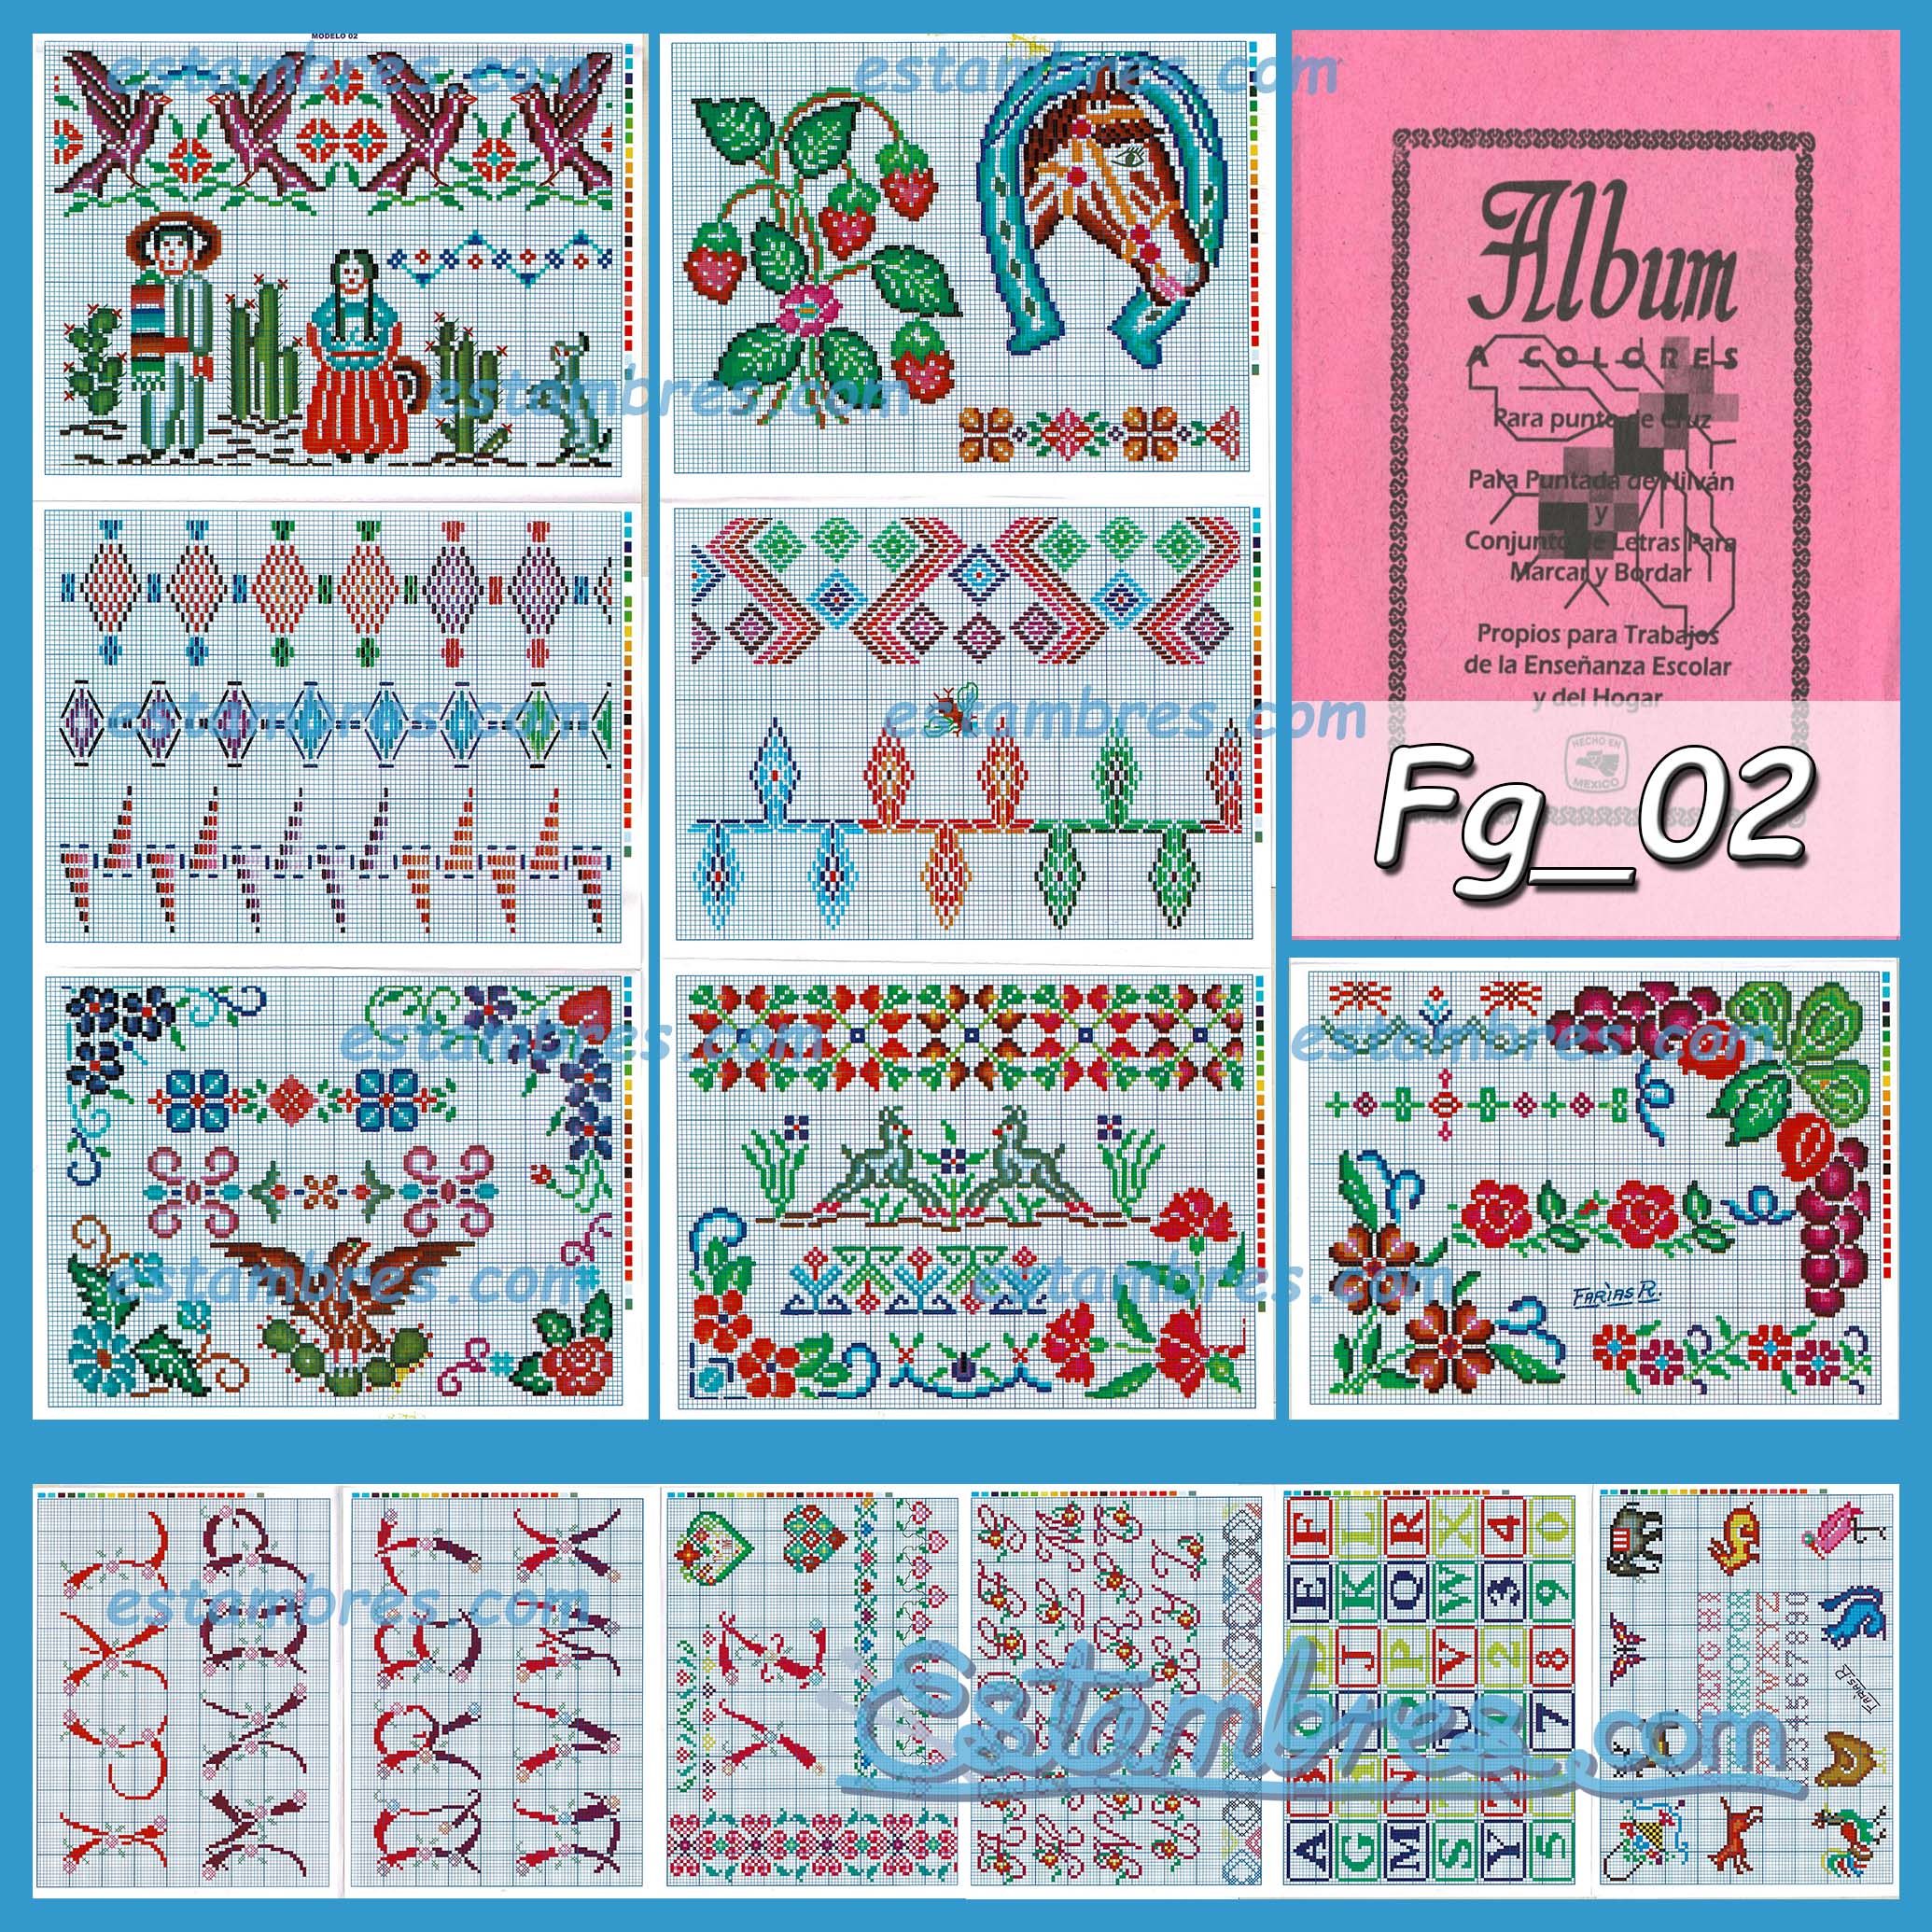 Farias Acordeon Book [29-52] - 2 of 2 - Embroidery Pattern, Crewel Stitch  Embro